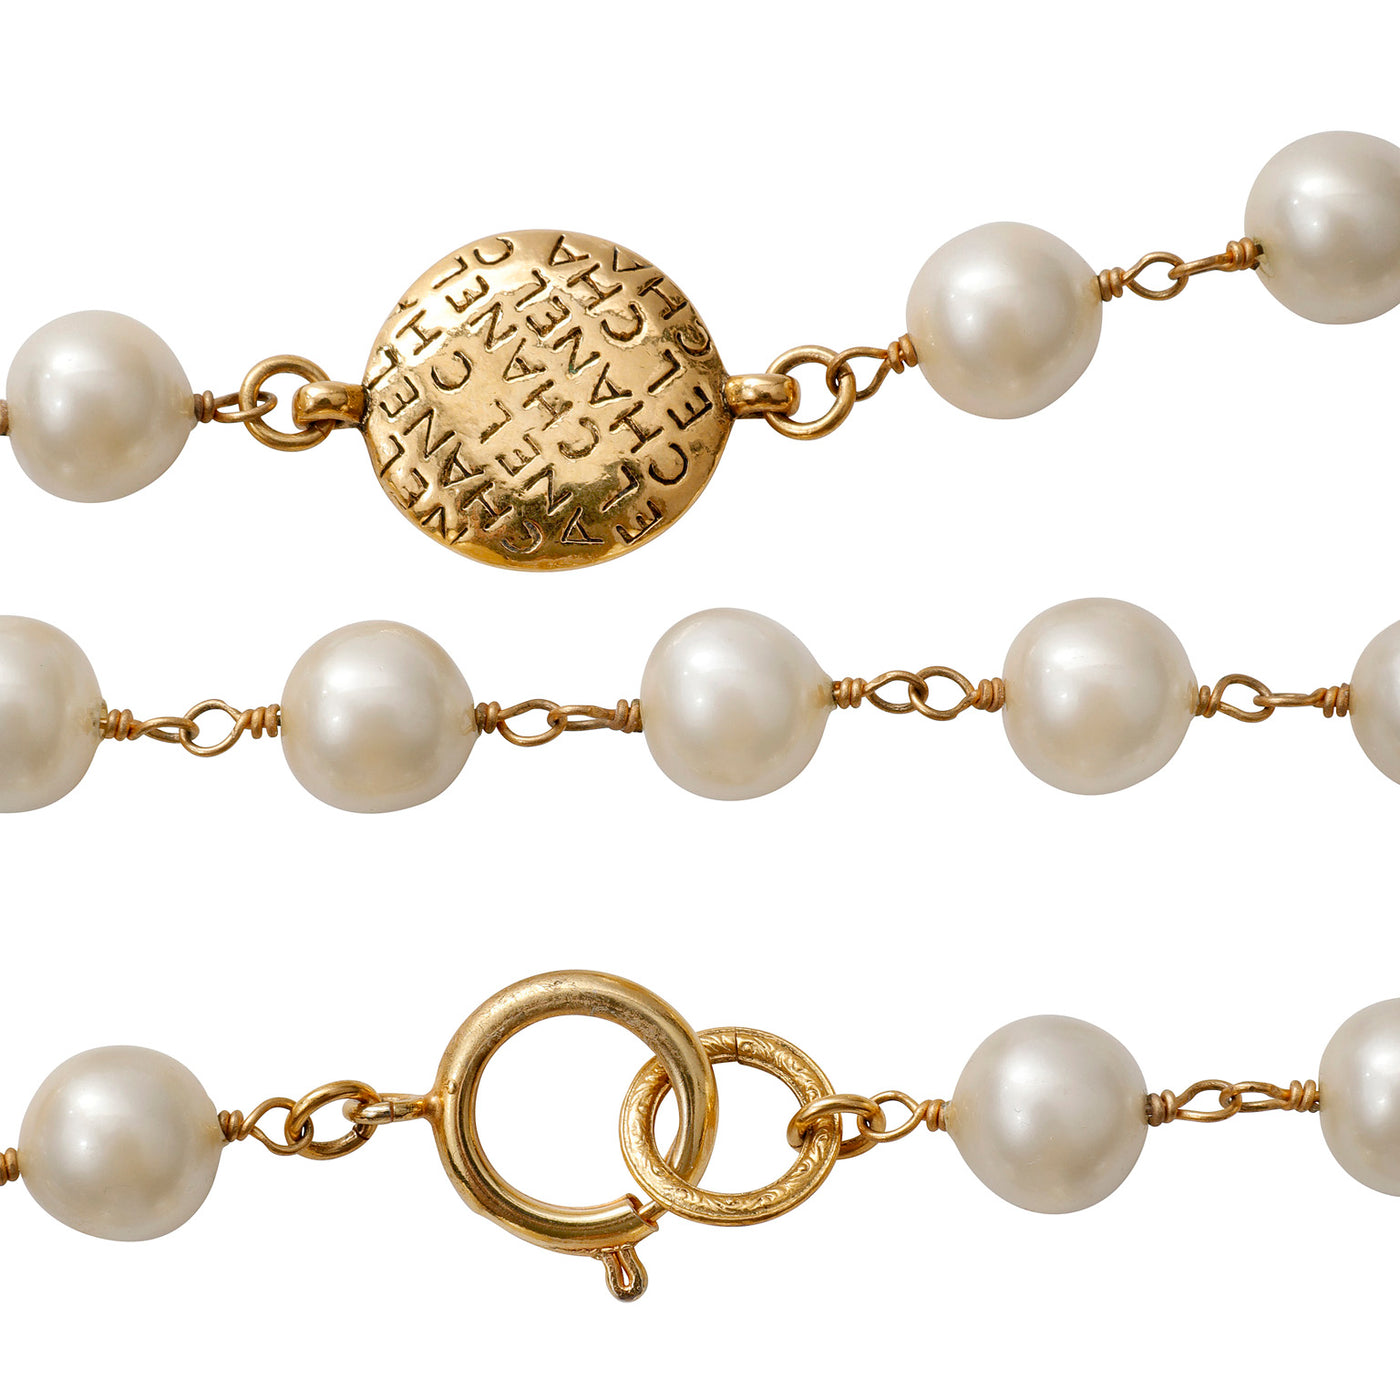 Chanel Vintage Pearl Extra Long Necklace with Coco Embossed Discs